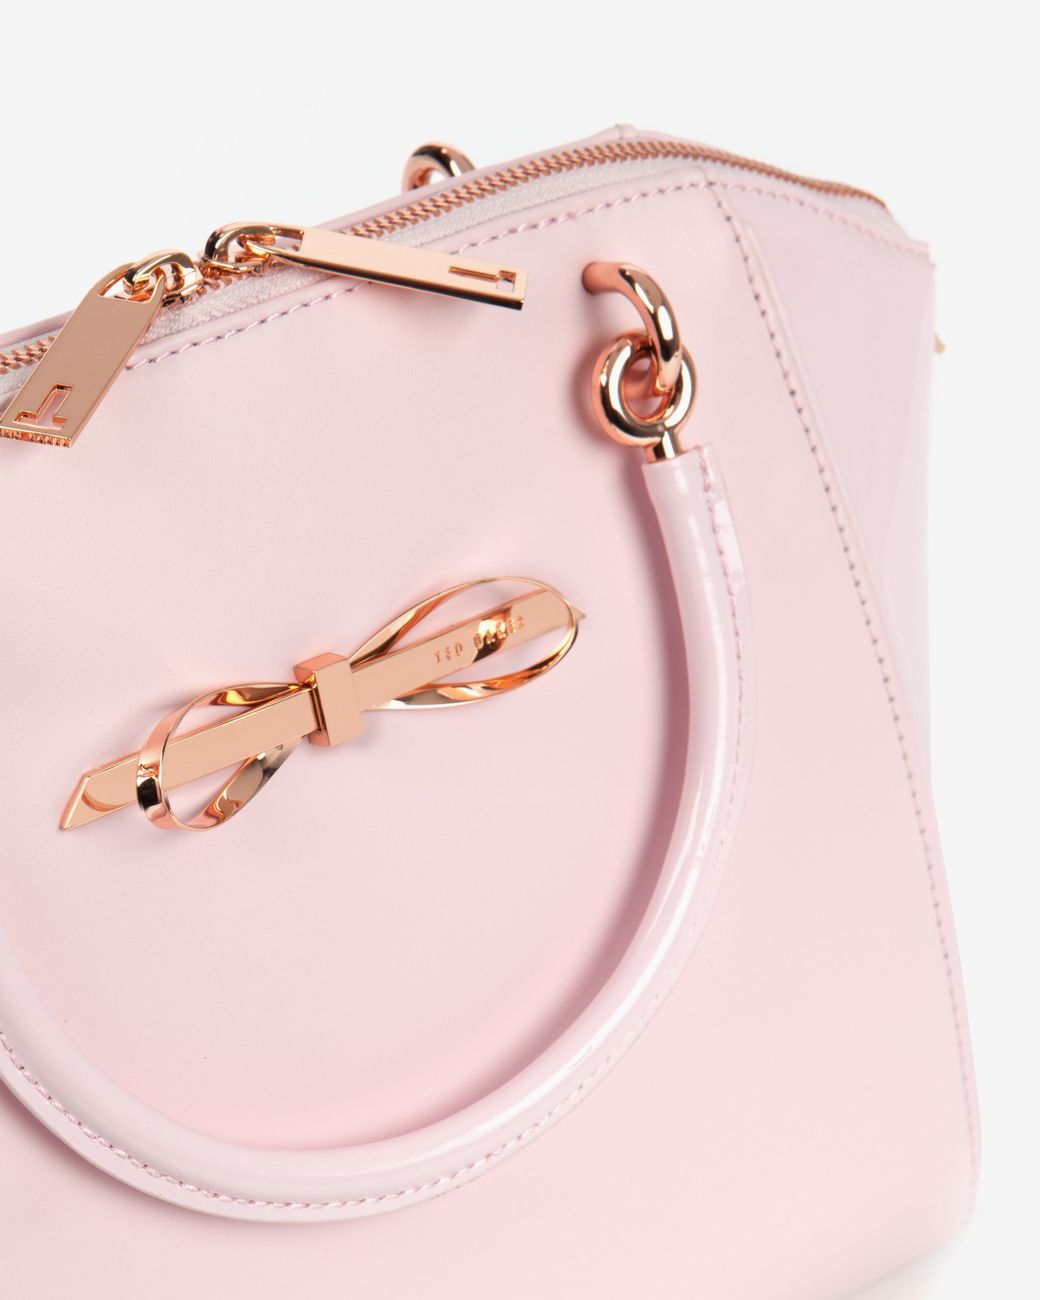 Outlet Bags & Handbags for Women from Ted Baker | FASHIOLA.co.uk